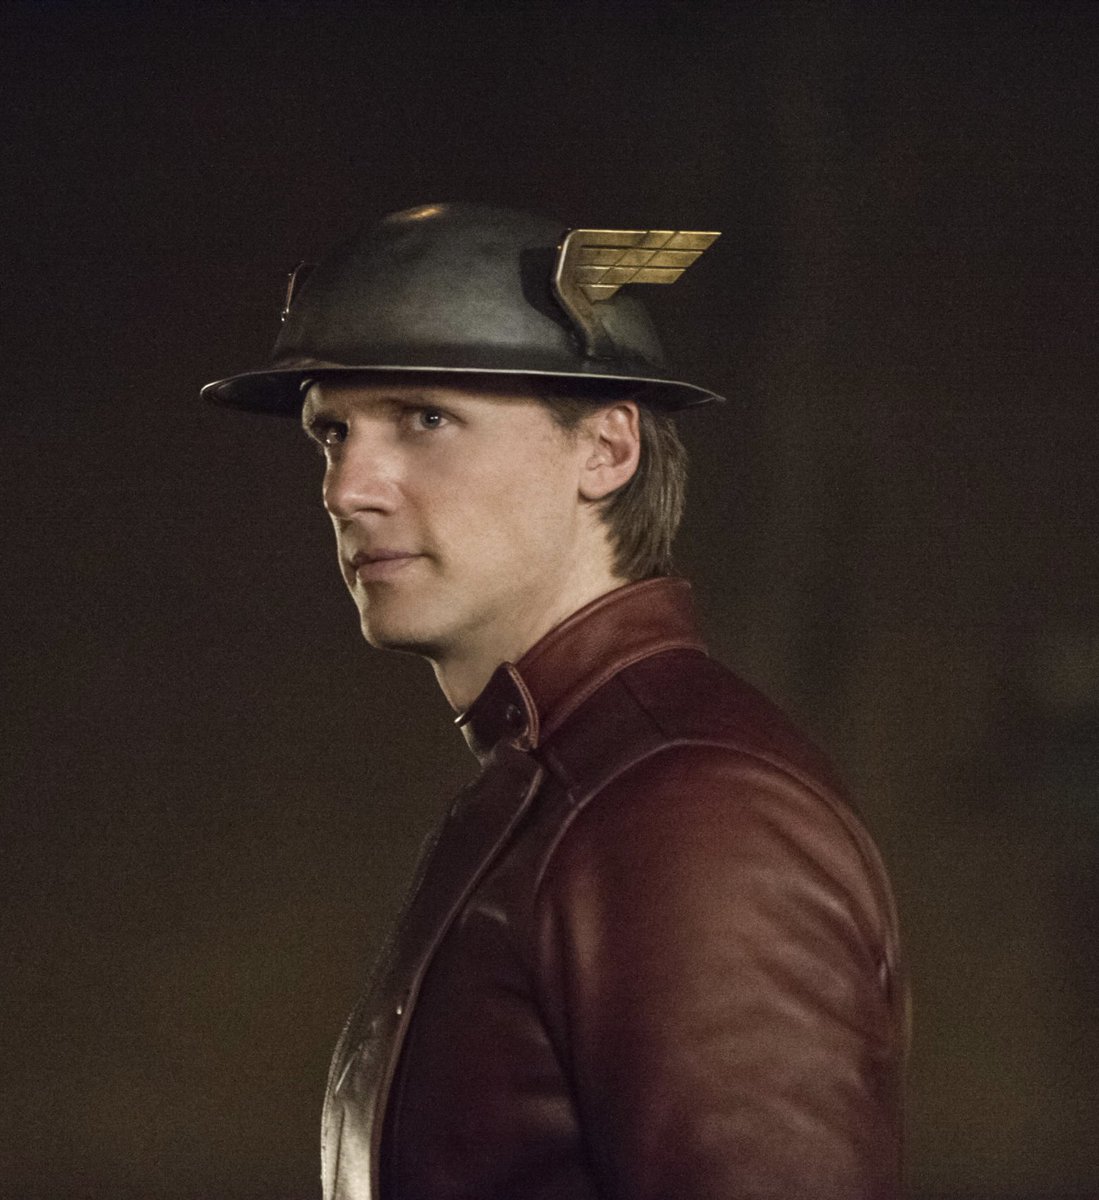 Teddy Sears says he doesn’t think that was him in ‘THE FLASH’ movie.

“I’m sleep-deprived with a newborn at home, so my memory is a little foggy. But I’m pretty sure I would have remembered shooting a major DC Studios film.”

(Source: tvline.com/news/the-flash…)